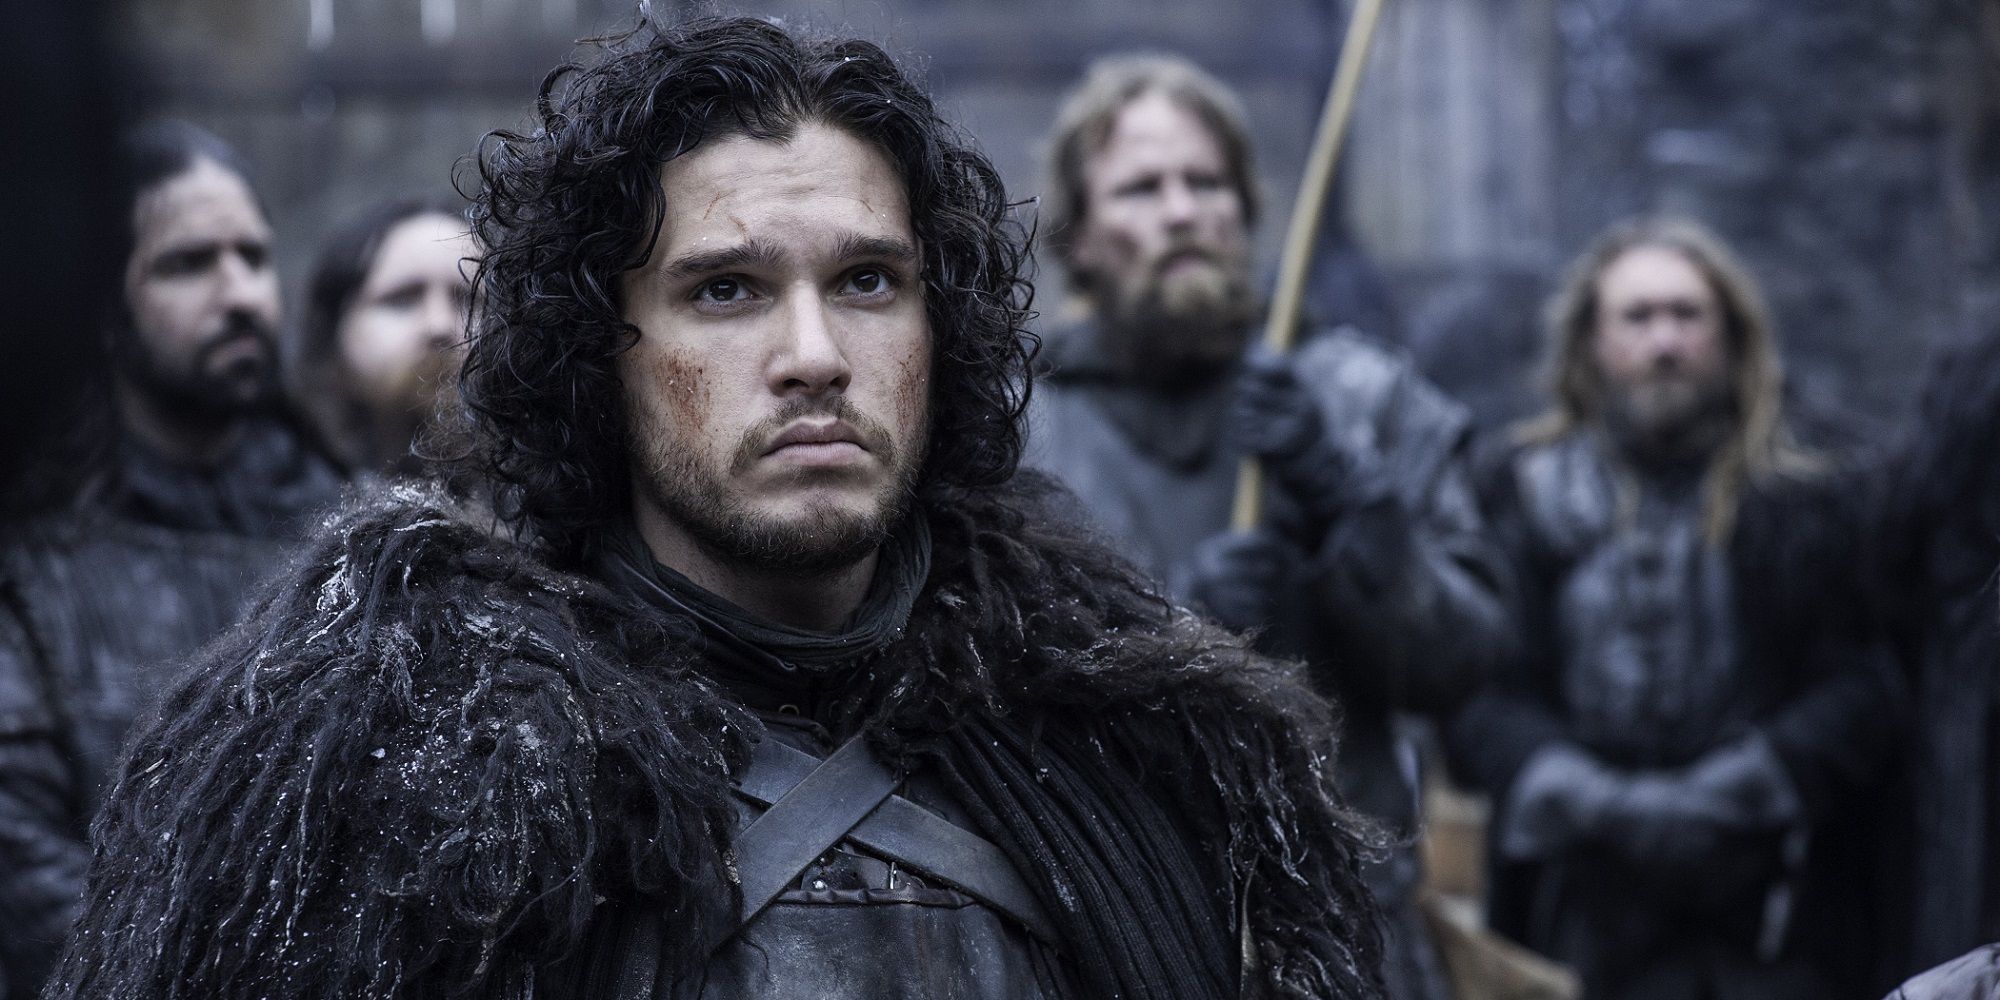 The Biggest Arguments On Game Of Thrones Ranked